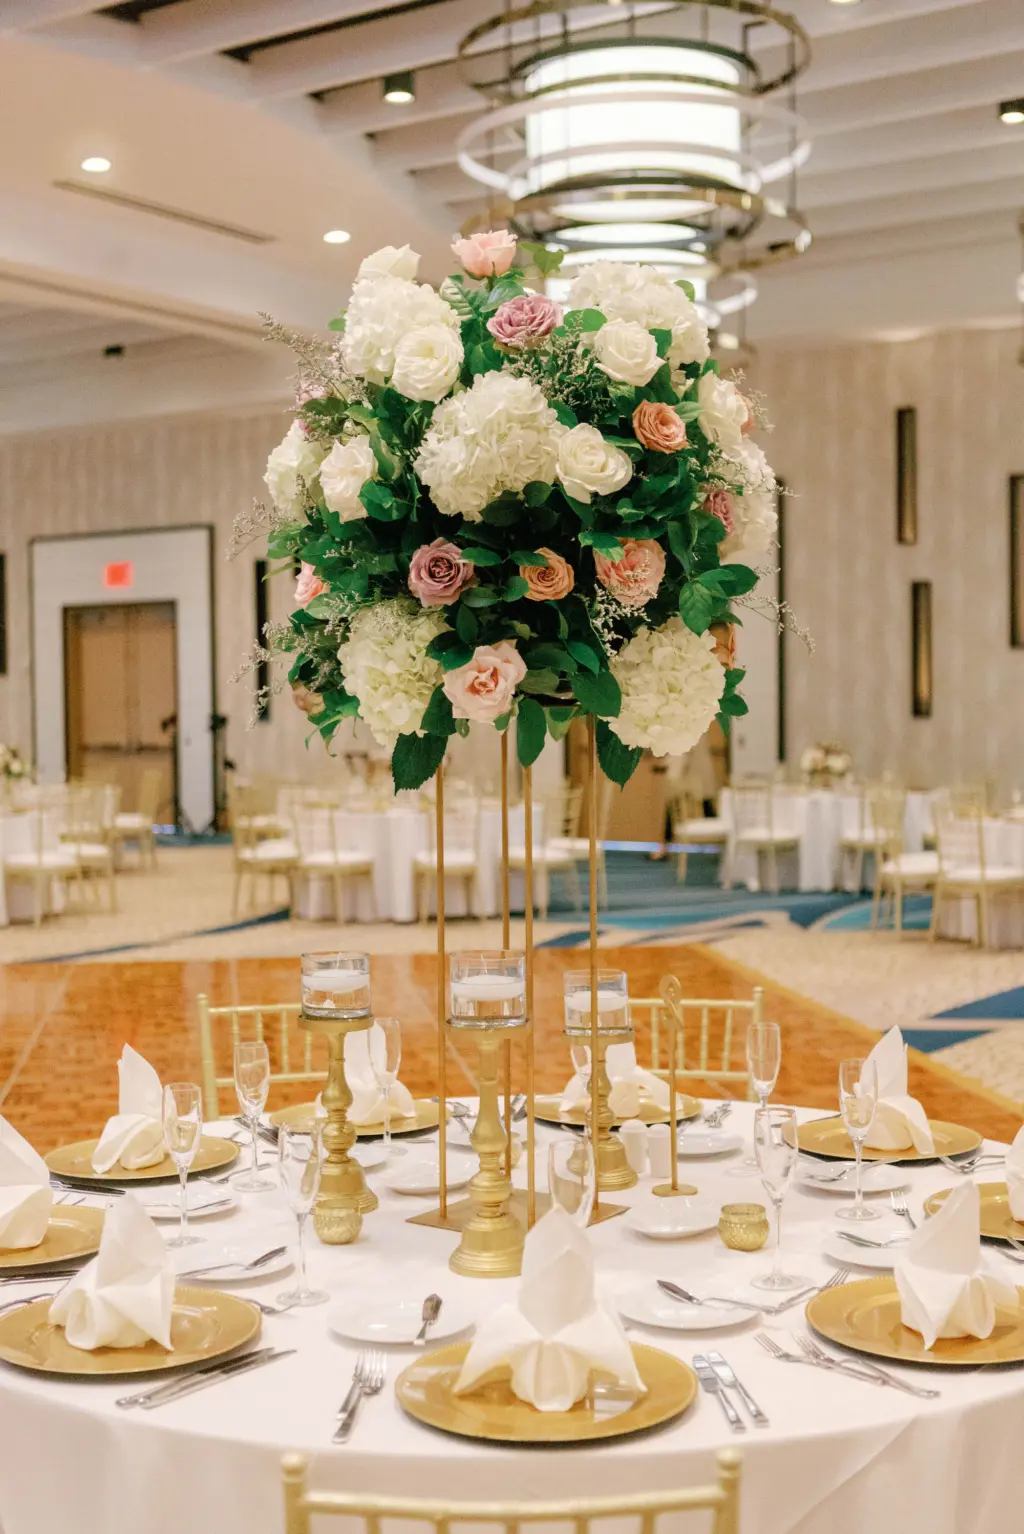 Elegant Gold Tablescape in Ballroom Wedding with Gold Chargers, White Linens, and Classic Florals in Tall Gold Centerpiece